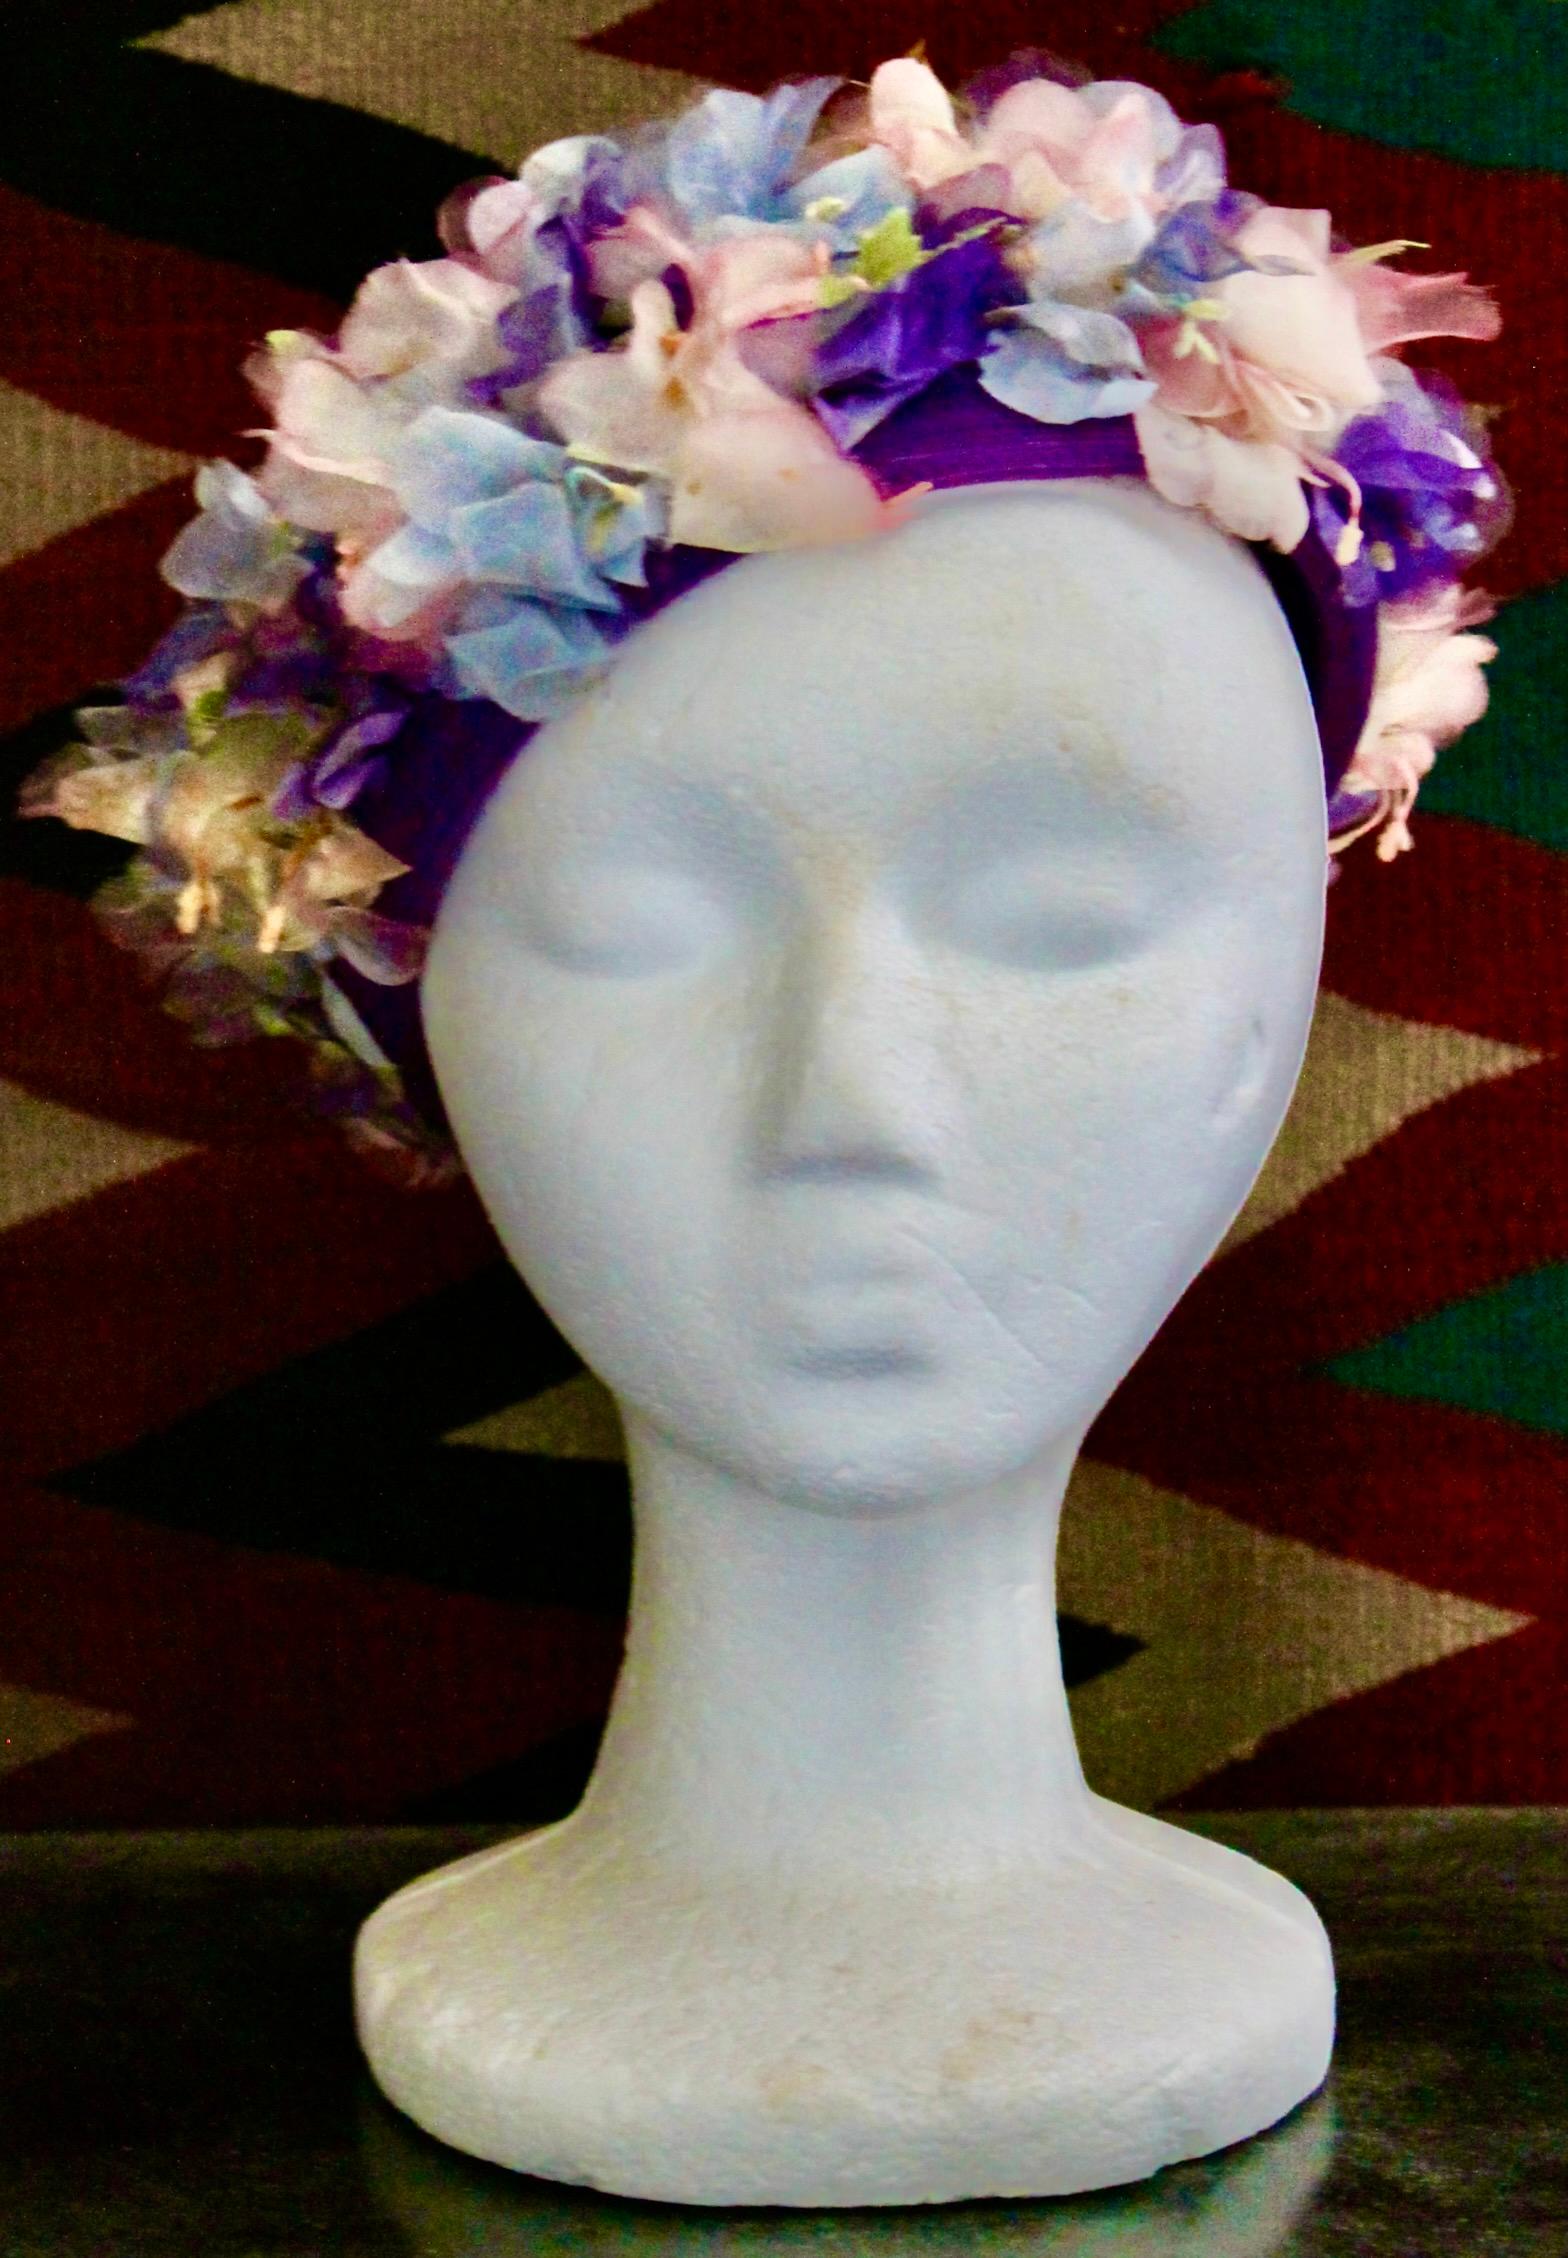 Elsa Schiaparelli Spring Hat with wreath of pastel silk flowers around the edge.
Wrapped straw, silken floss flowers, hand sewn attached to netting frame.
Outside measure 10